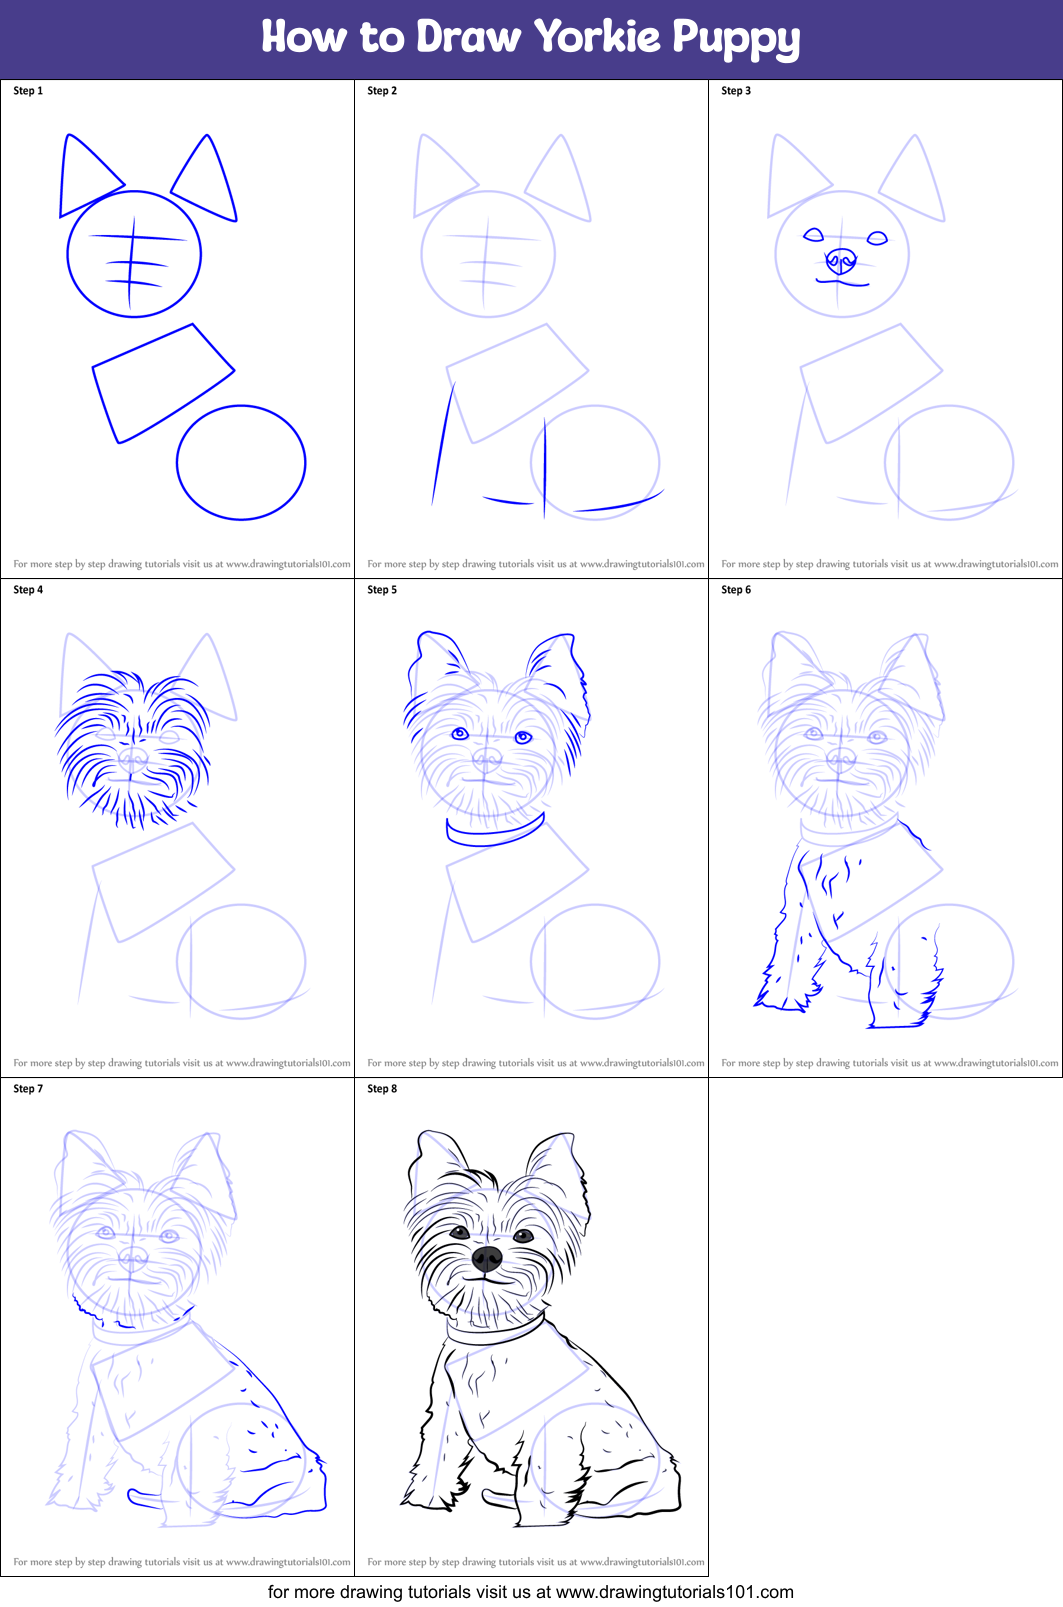 How to Draw Yorkie Puppy printable step by step drawing sheet